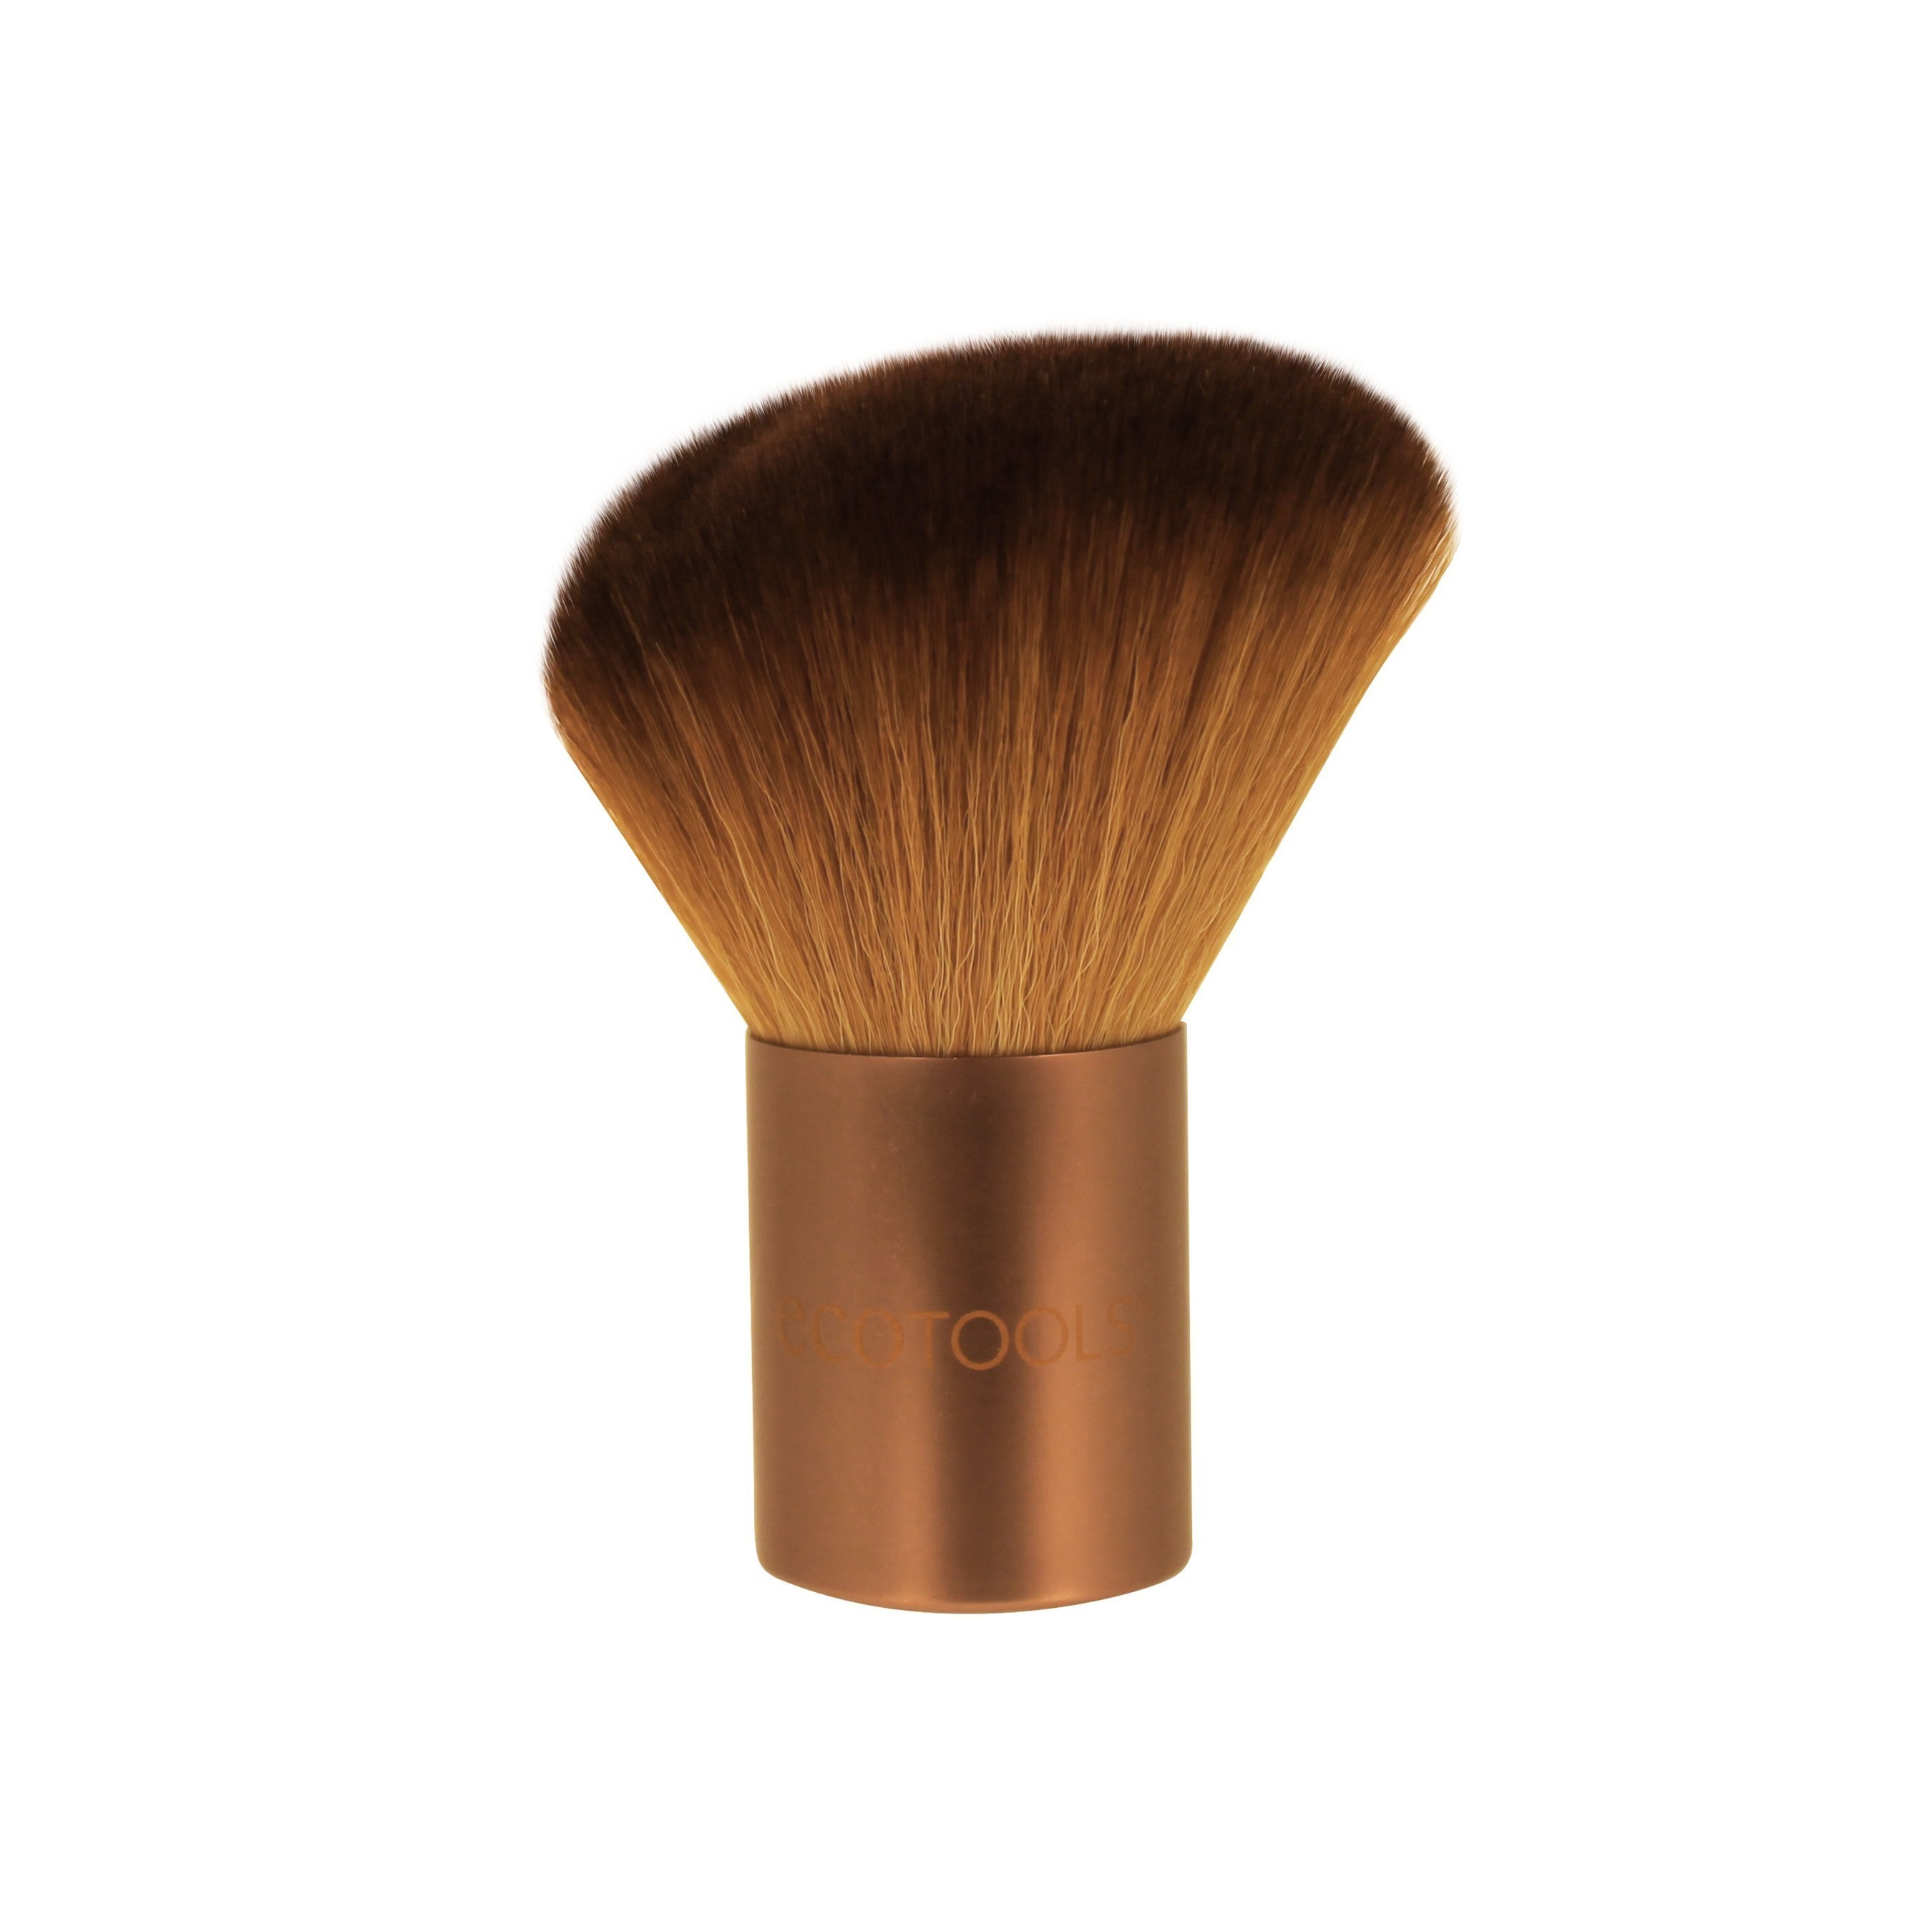 The new EcoTools Angled Kabuki Brush is the largest and softest brush in the EcoTools line. It's ideal for adding definition and glow to your face, neck, decolletage and shoulders with a sweep of bronzer or powder.